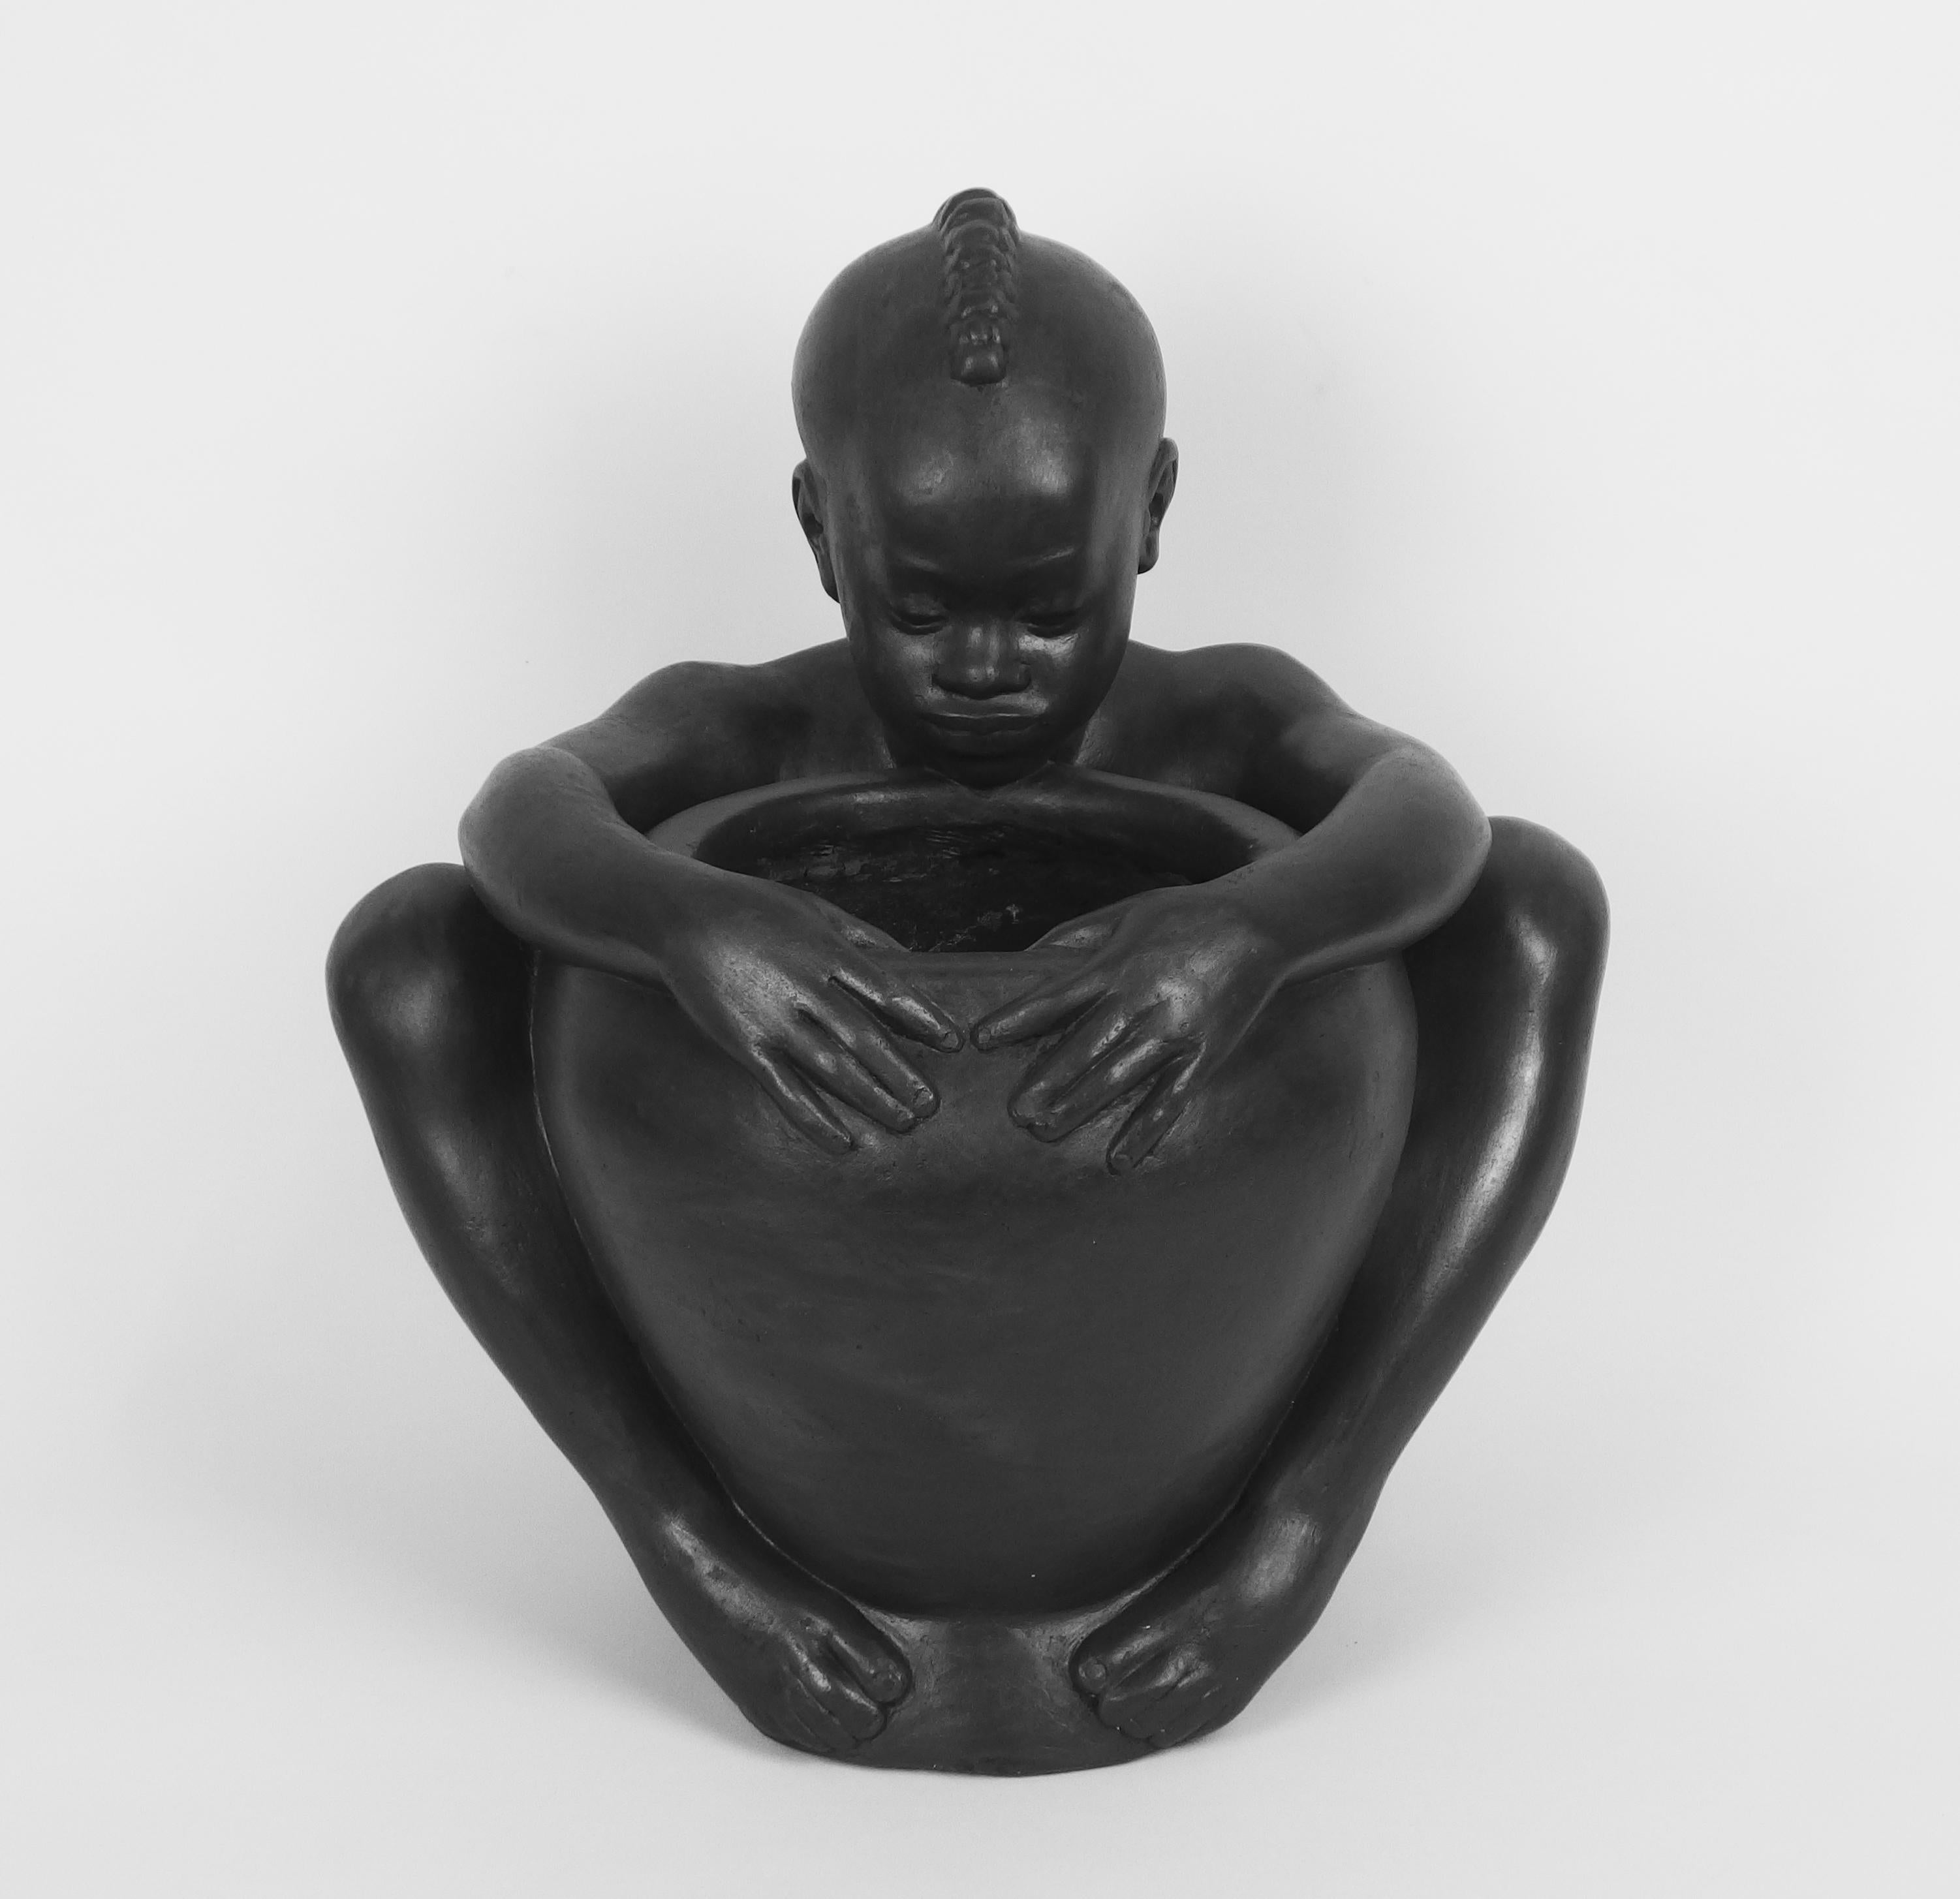 A black patinated plaster figure of a sitting young black boy holding a vase in his hands.
created by Riccardo Scarpa, circa 1960.
Riccardo Scarpa(1905-99)born in Venise ,studied at the royal academy of Venise art school, he lived in Paris from